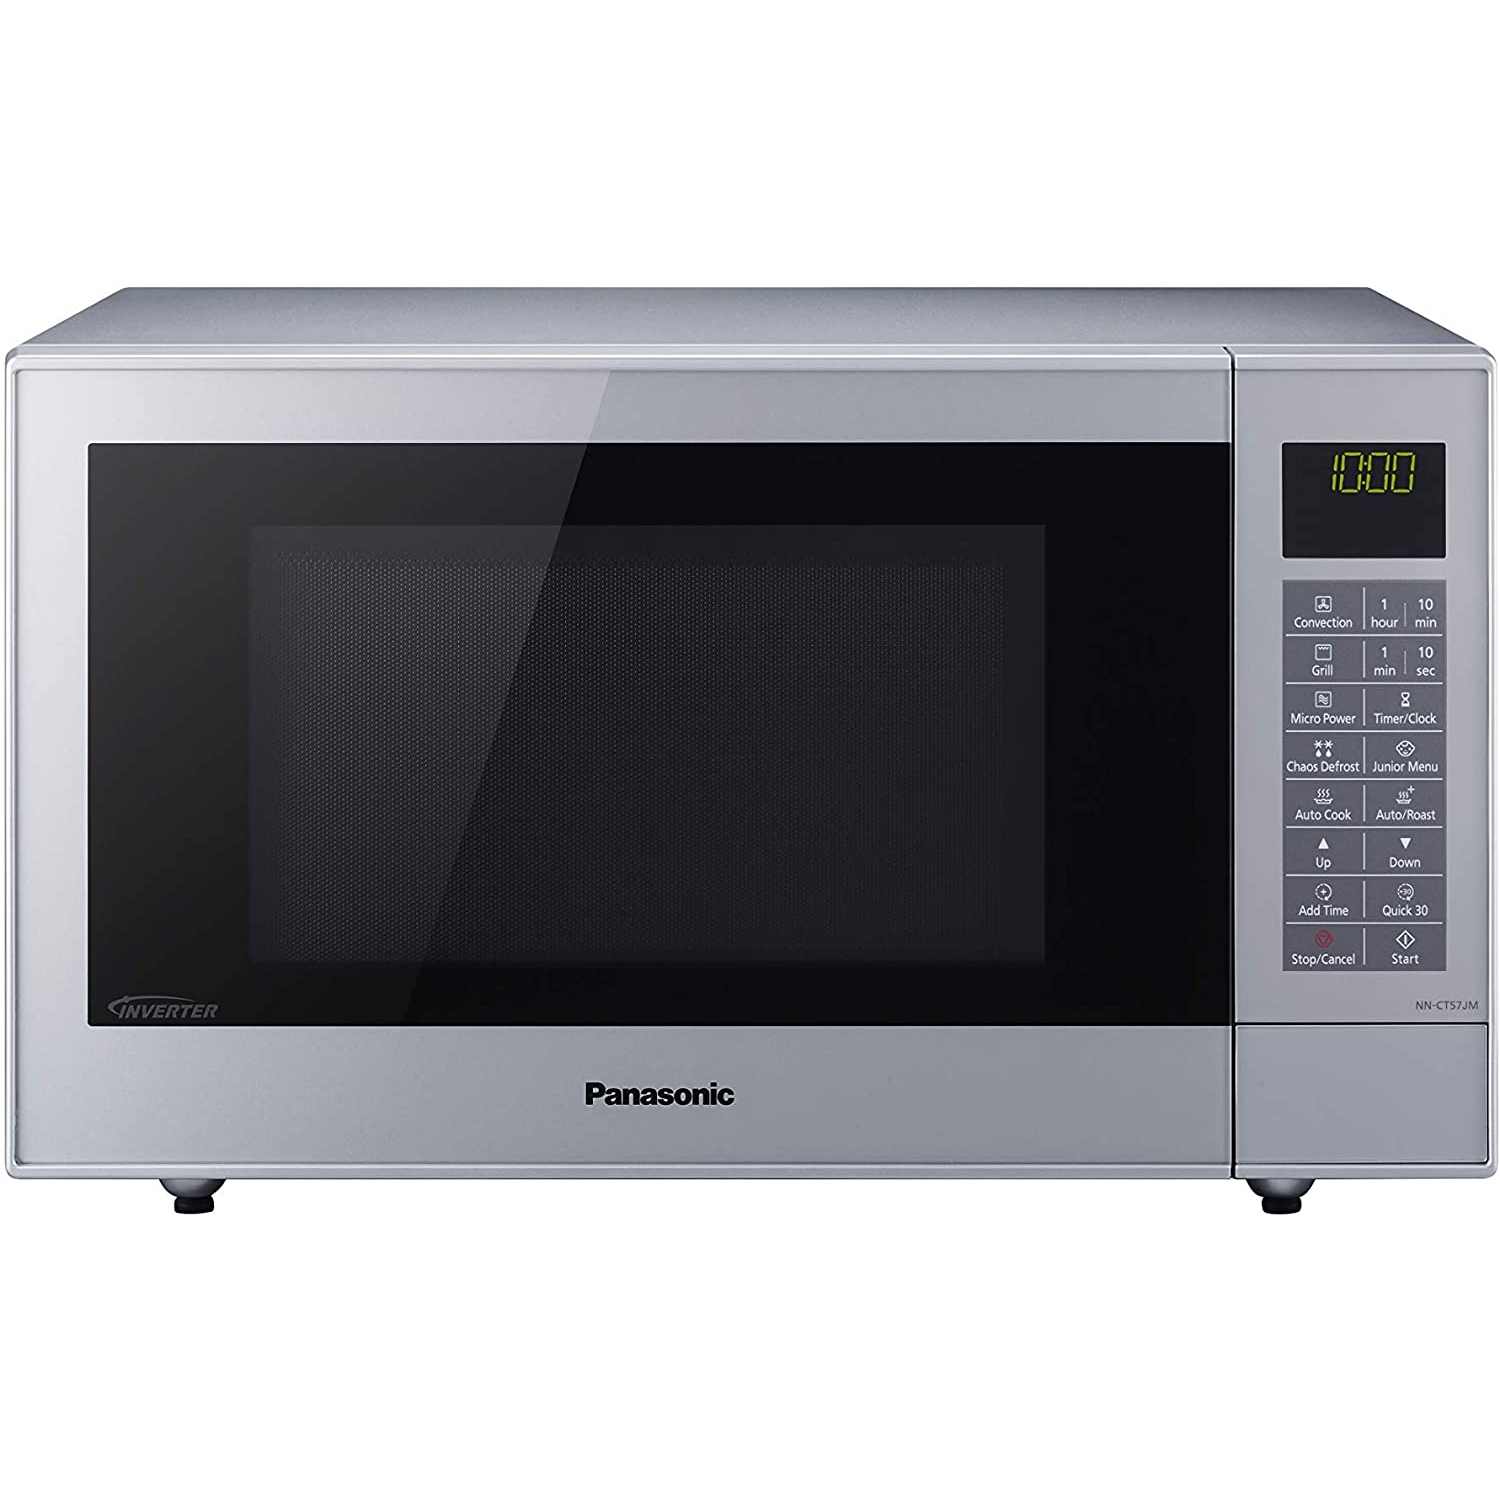 Panasonic Slimline Combination Microwave Oven with Turntable, 27 Litres, Silver - 0